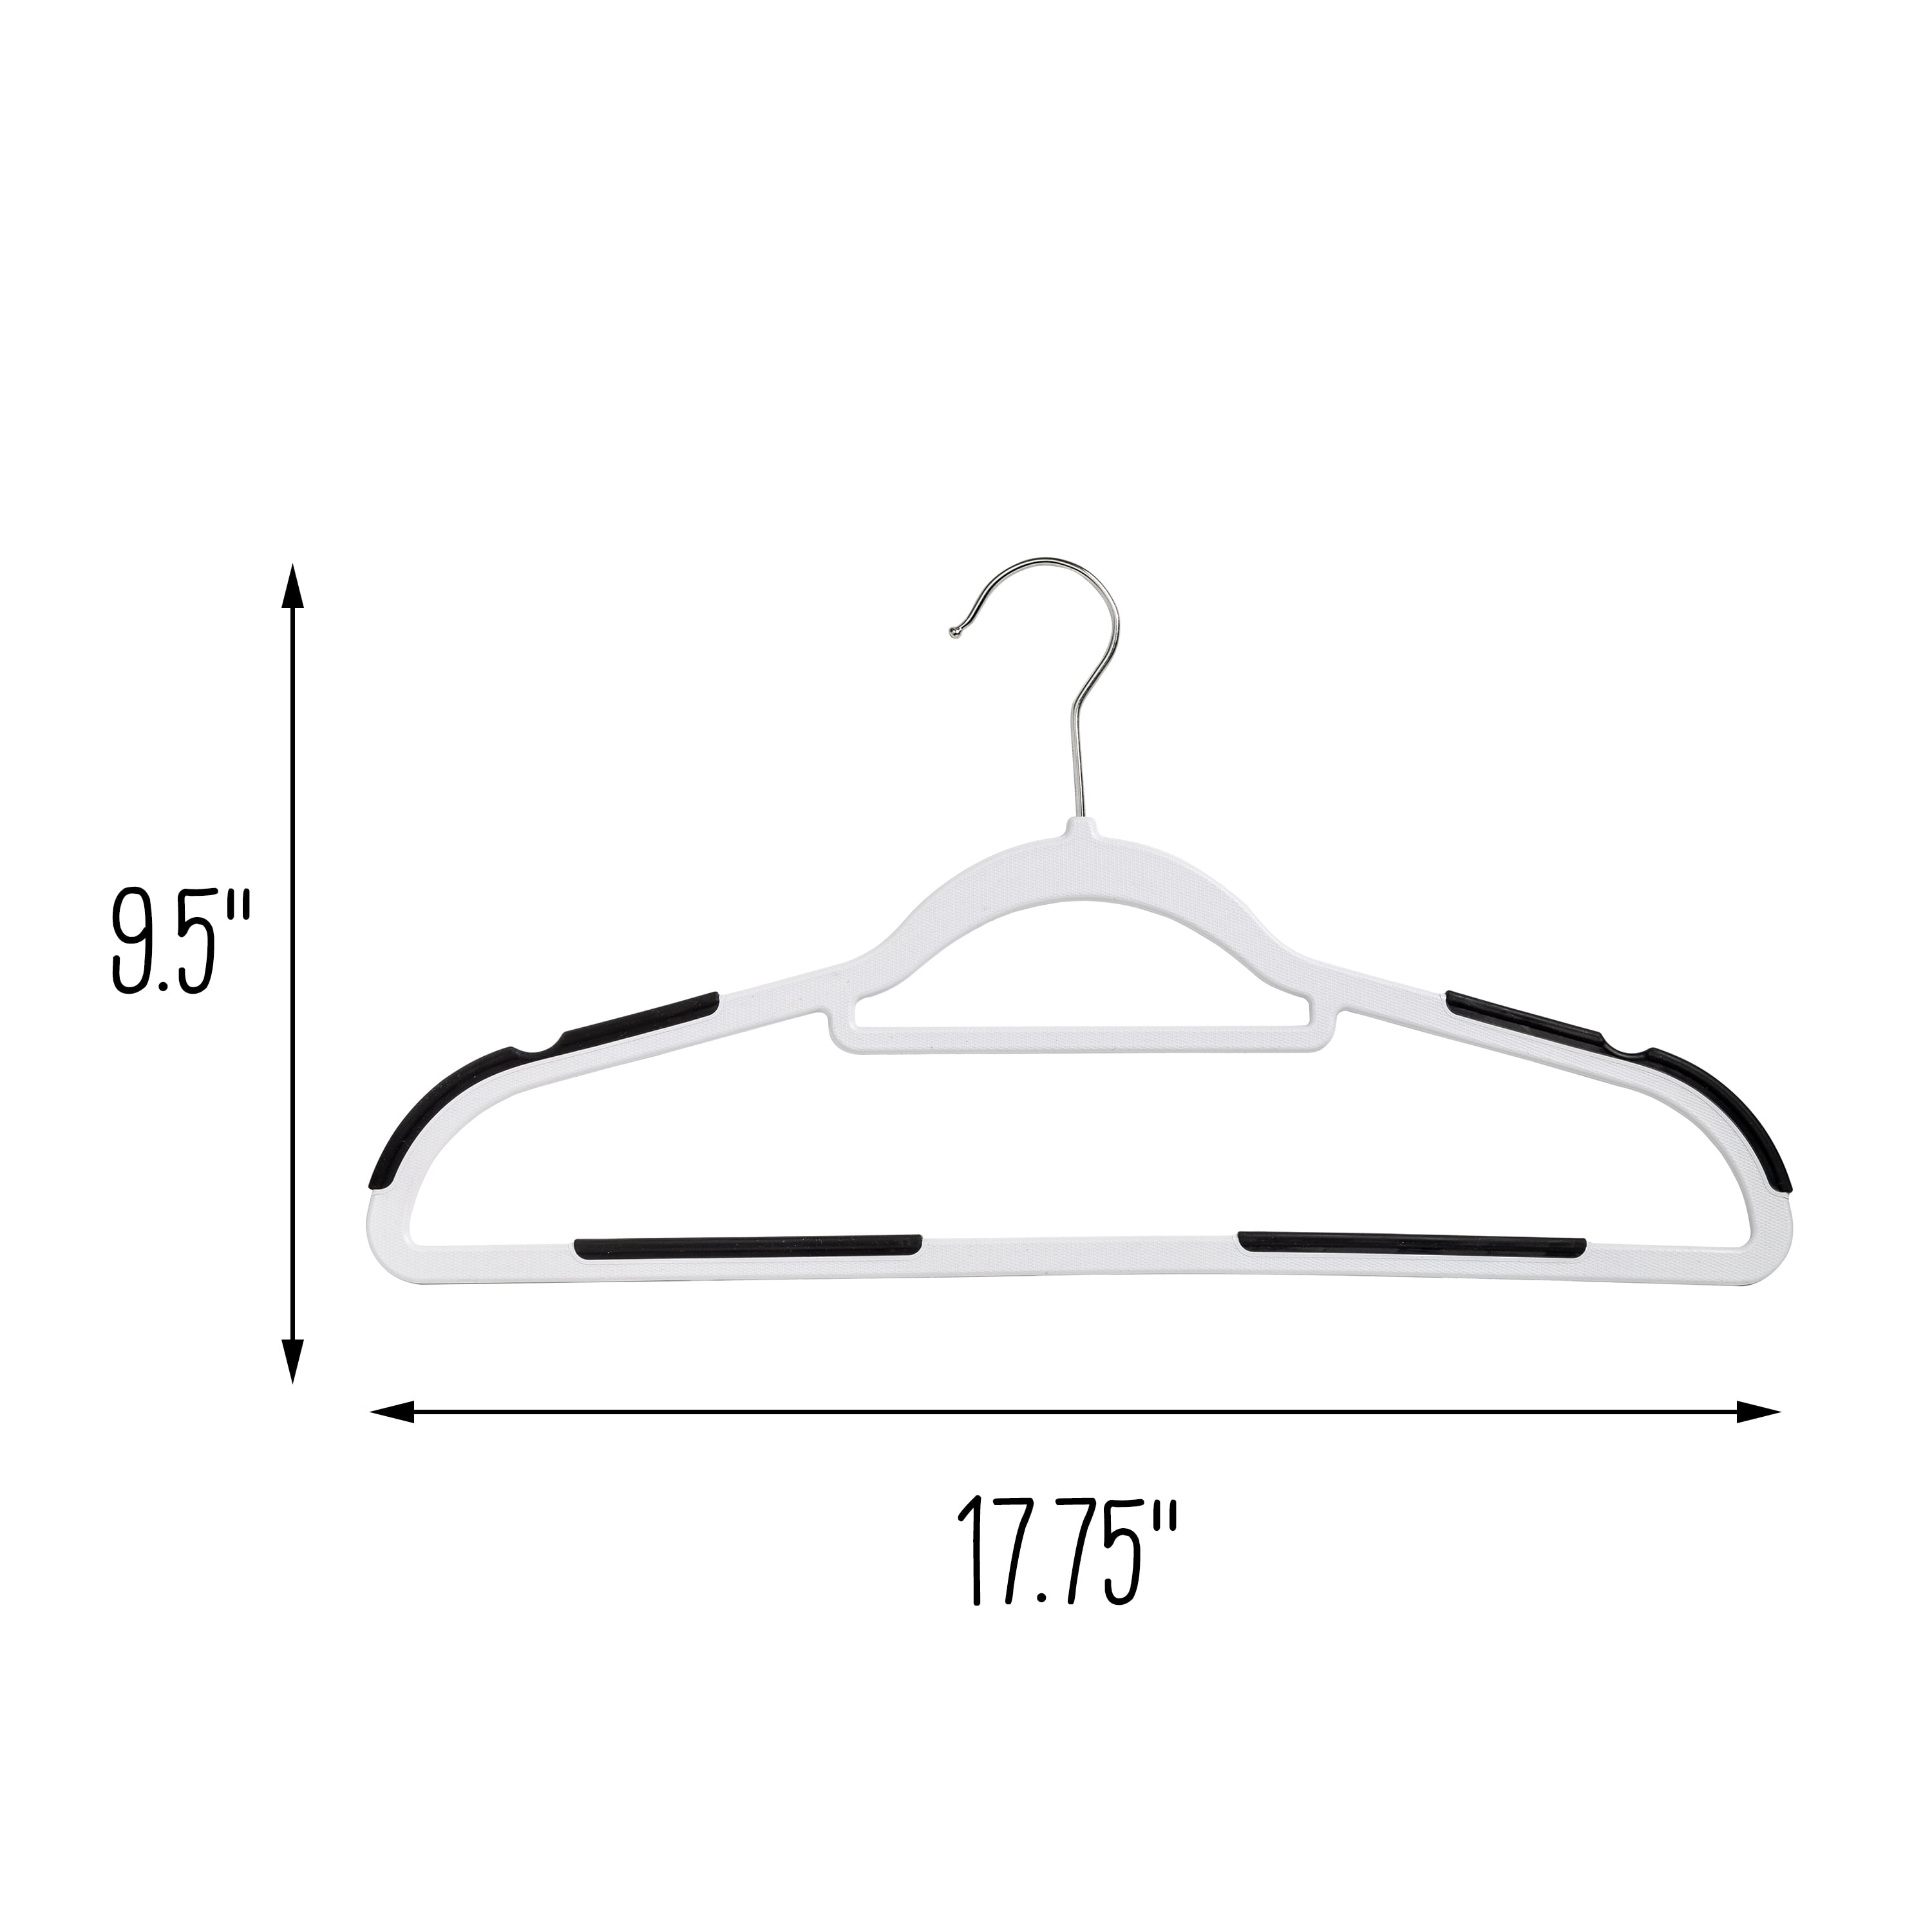 Honey-Can-Do HNG-01178 Super Heavyweight Hangers, 3-Pack, White, 86-Gram,  Large